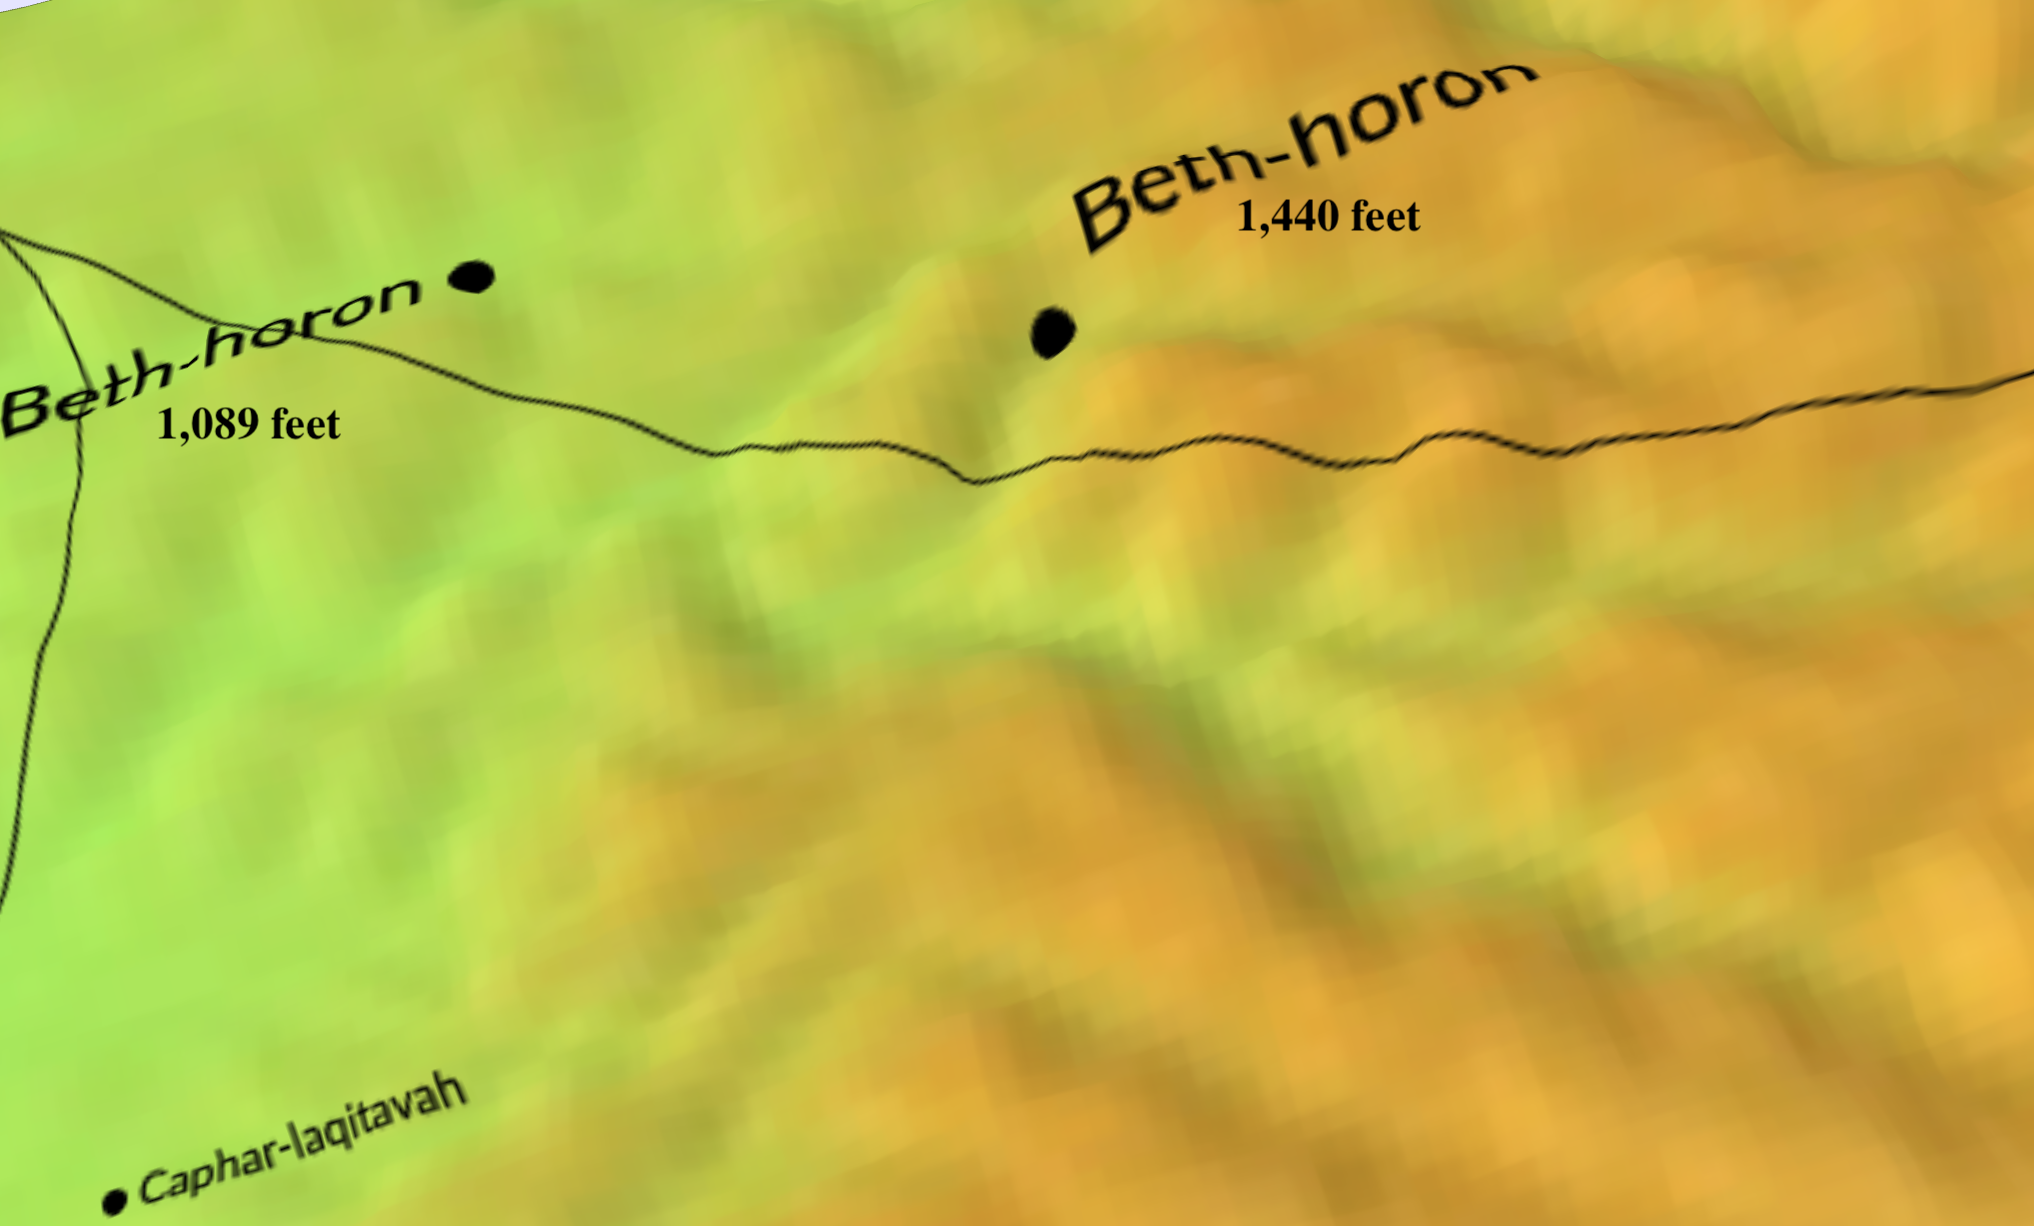 A topography map of Beth-horon in the tribe of Ephraim.